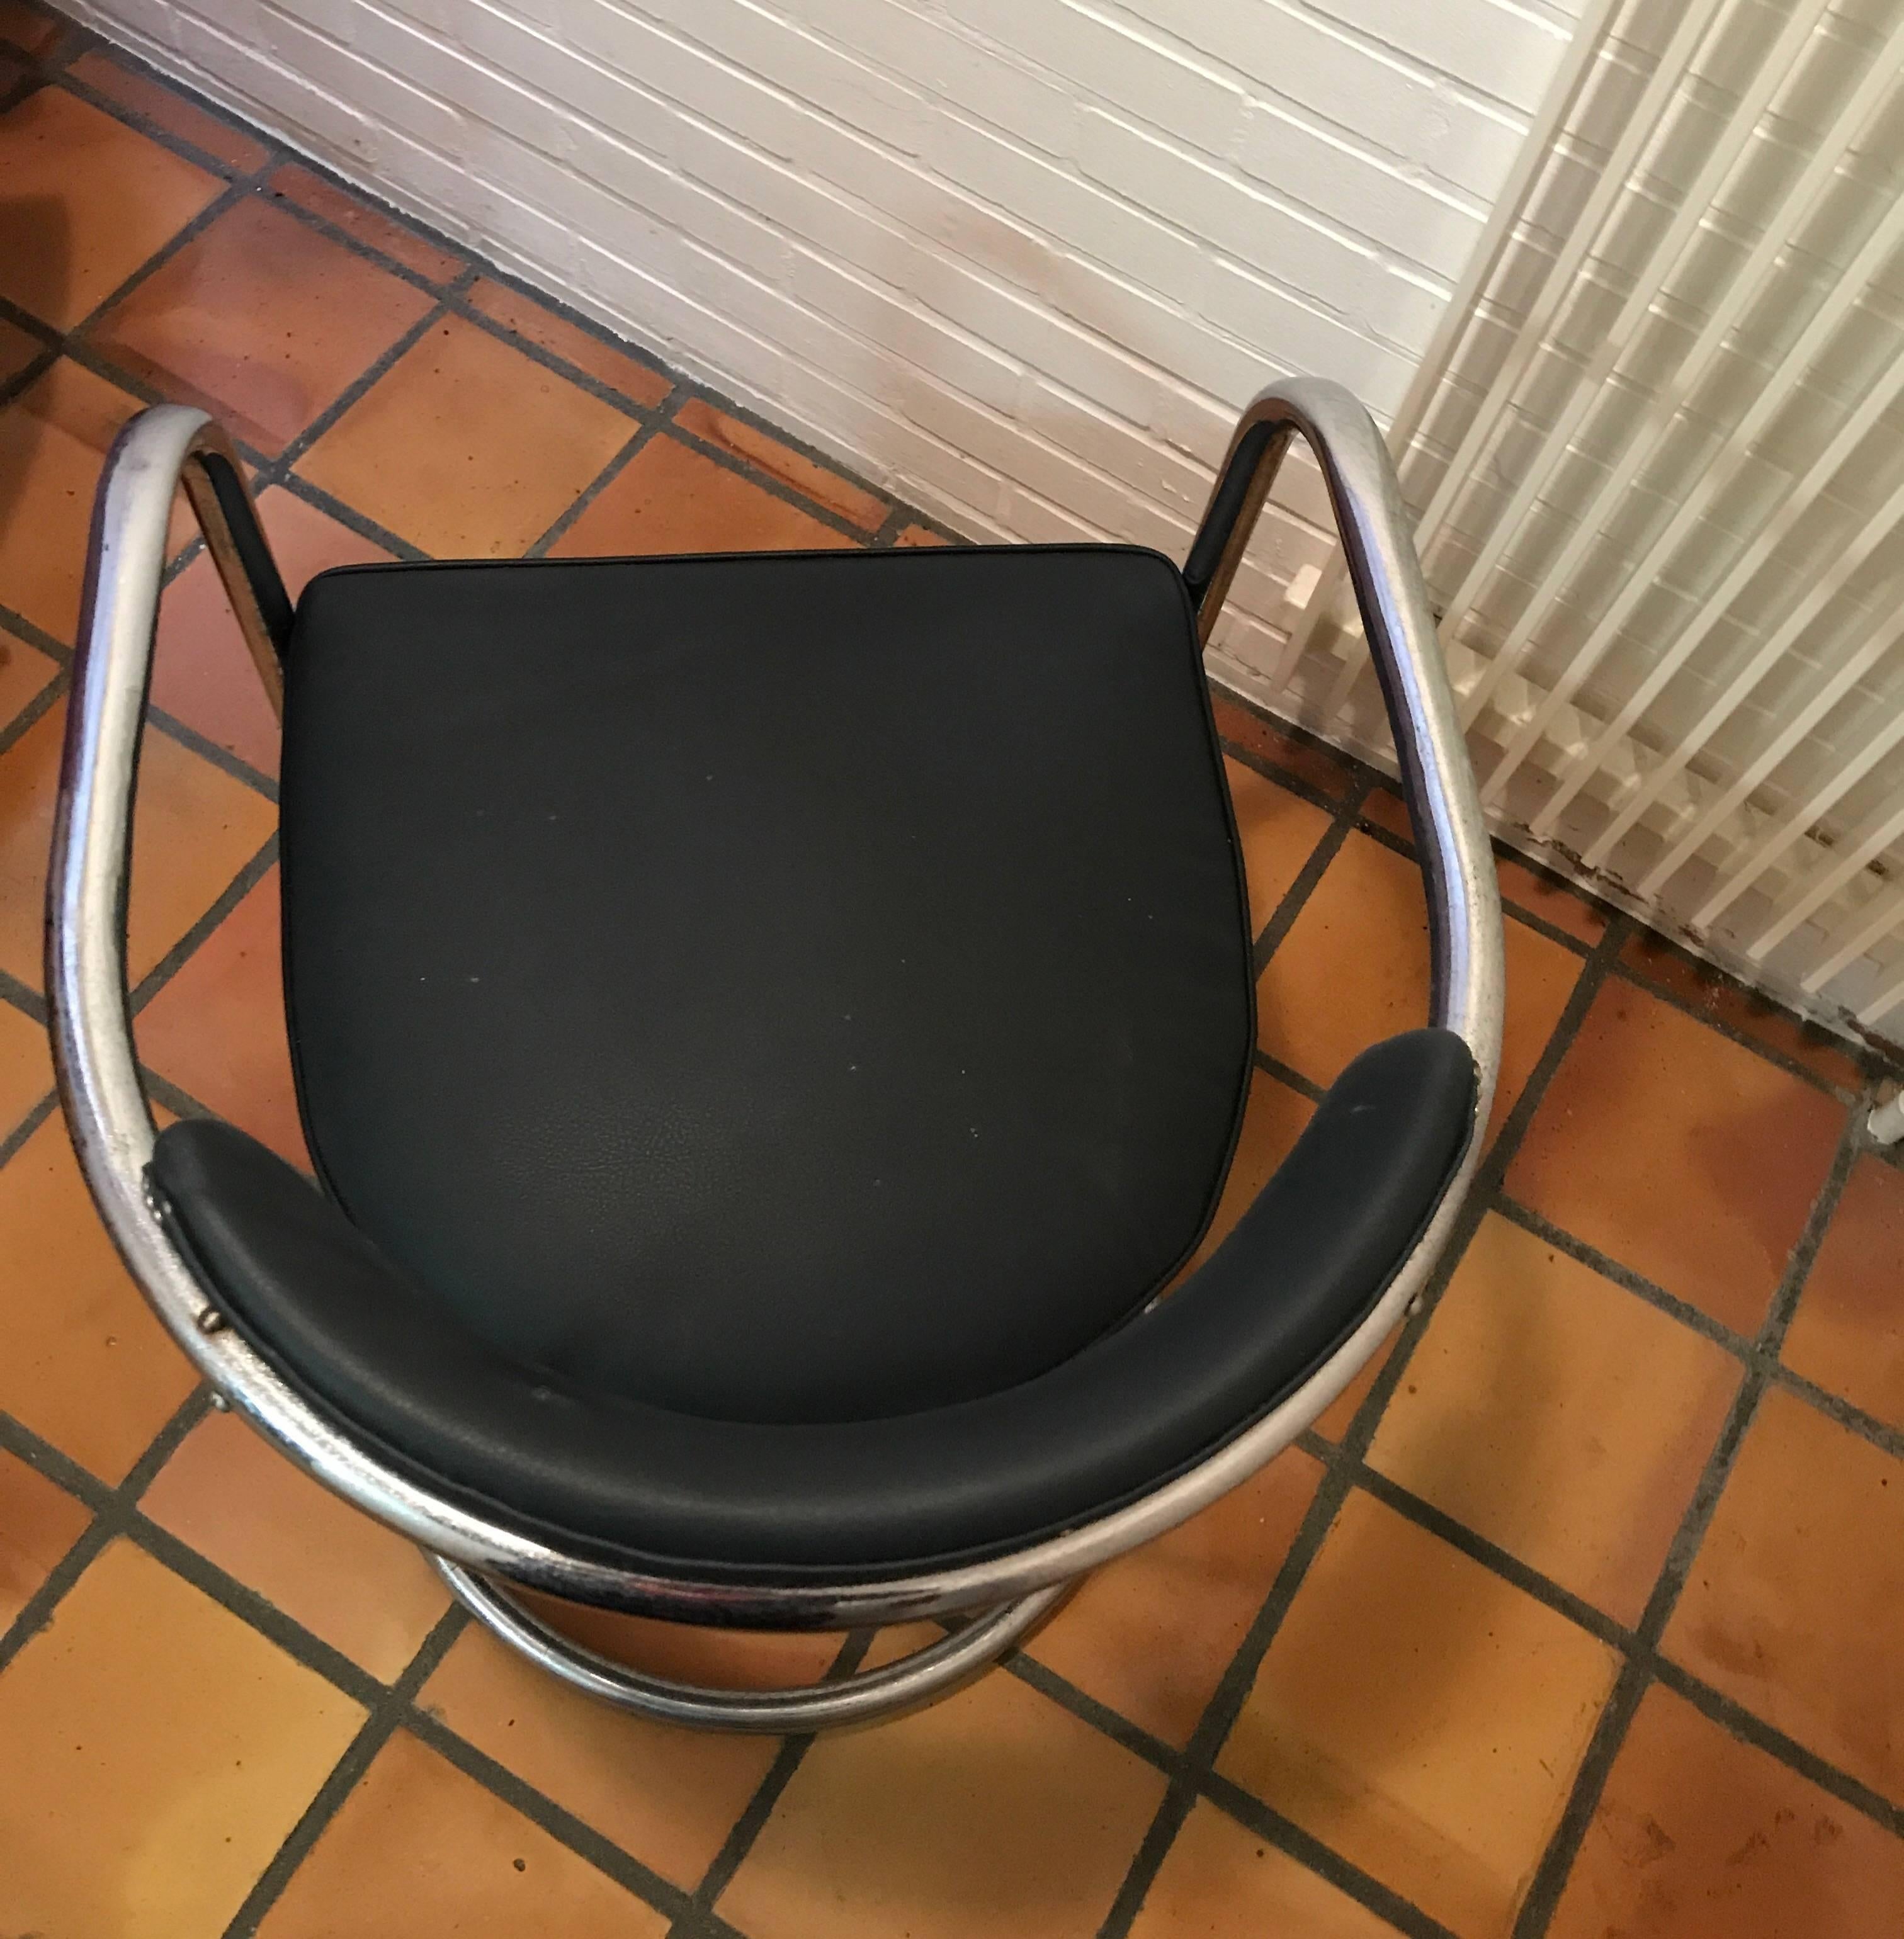 Chair circa 1930 produced under license off Thonet and designed by Hans und Wassily luckardt and produced by Mucke-Melder in Freystadt, Germany
Nr 33 in the catalogue.